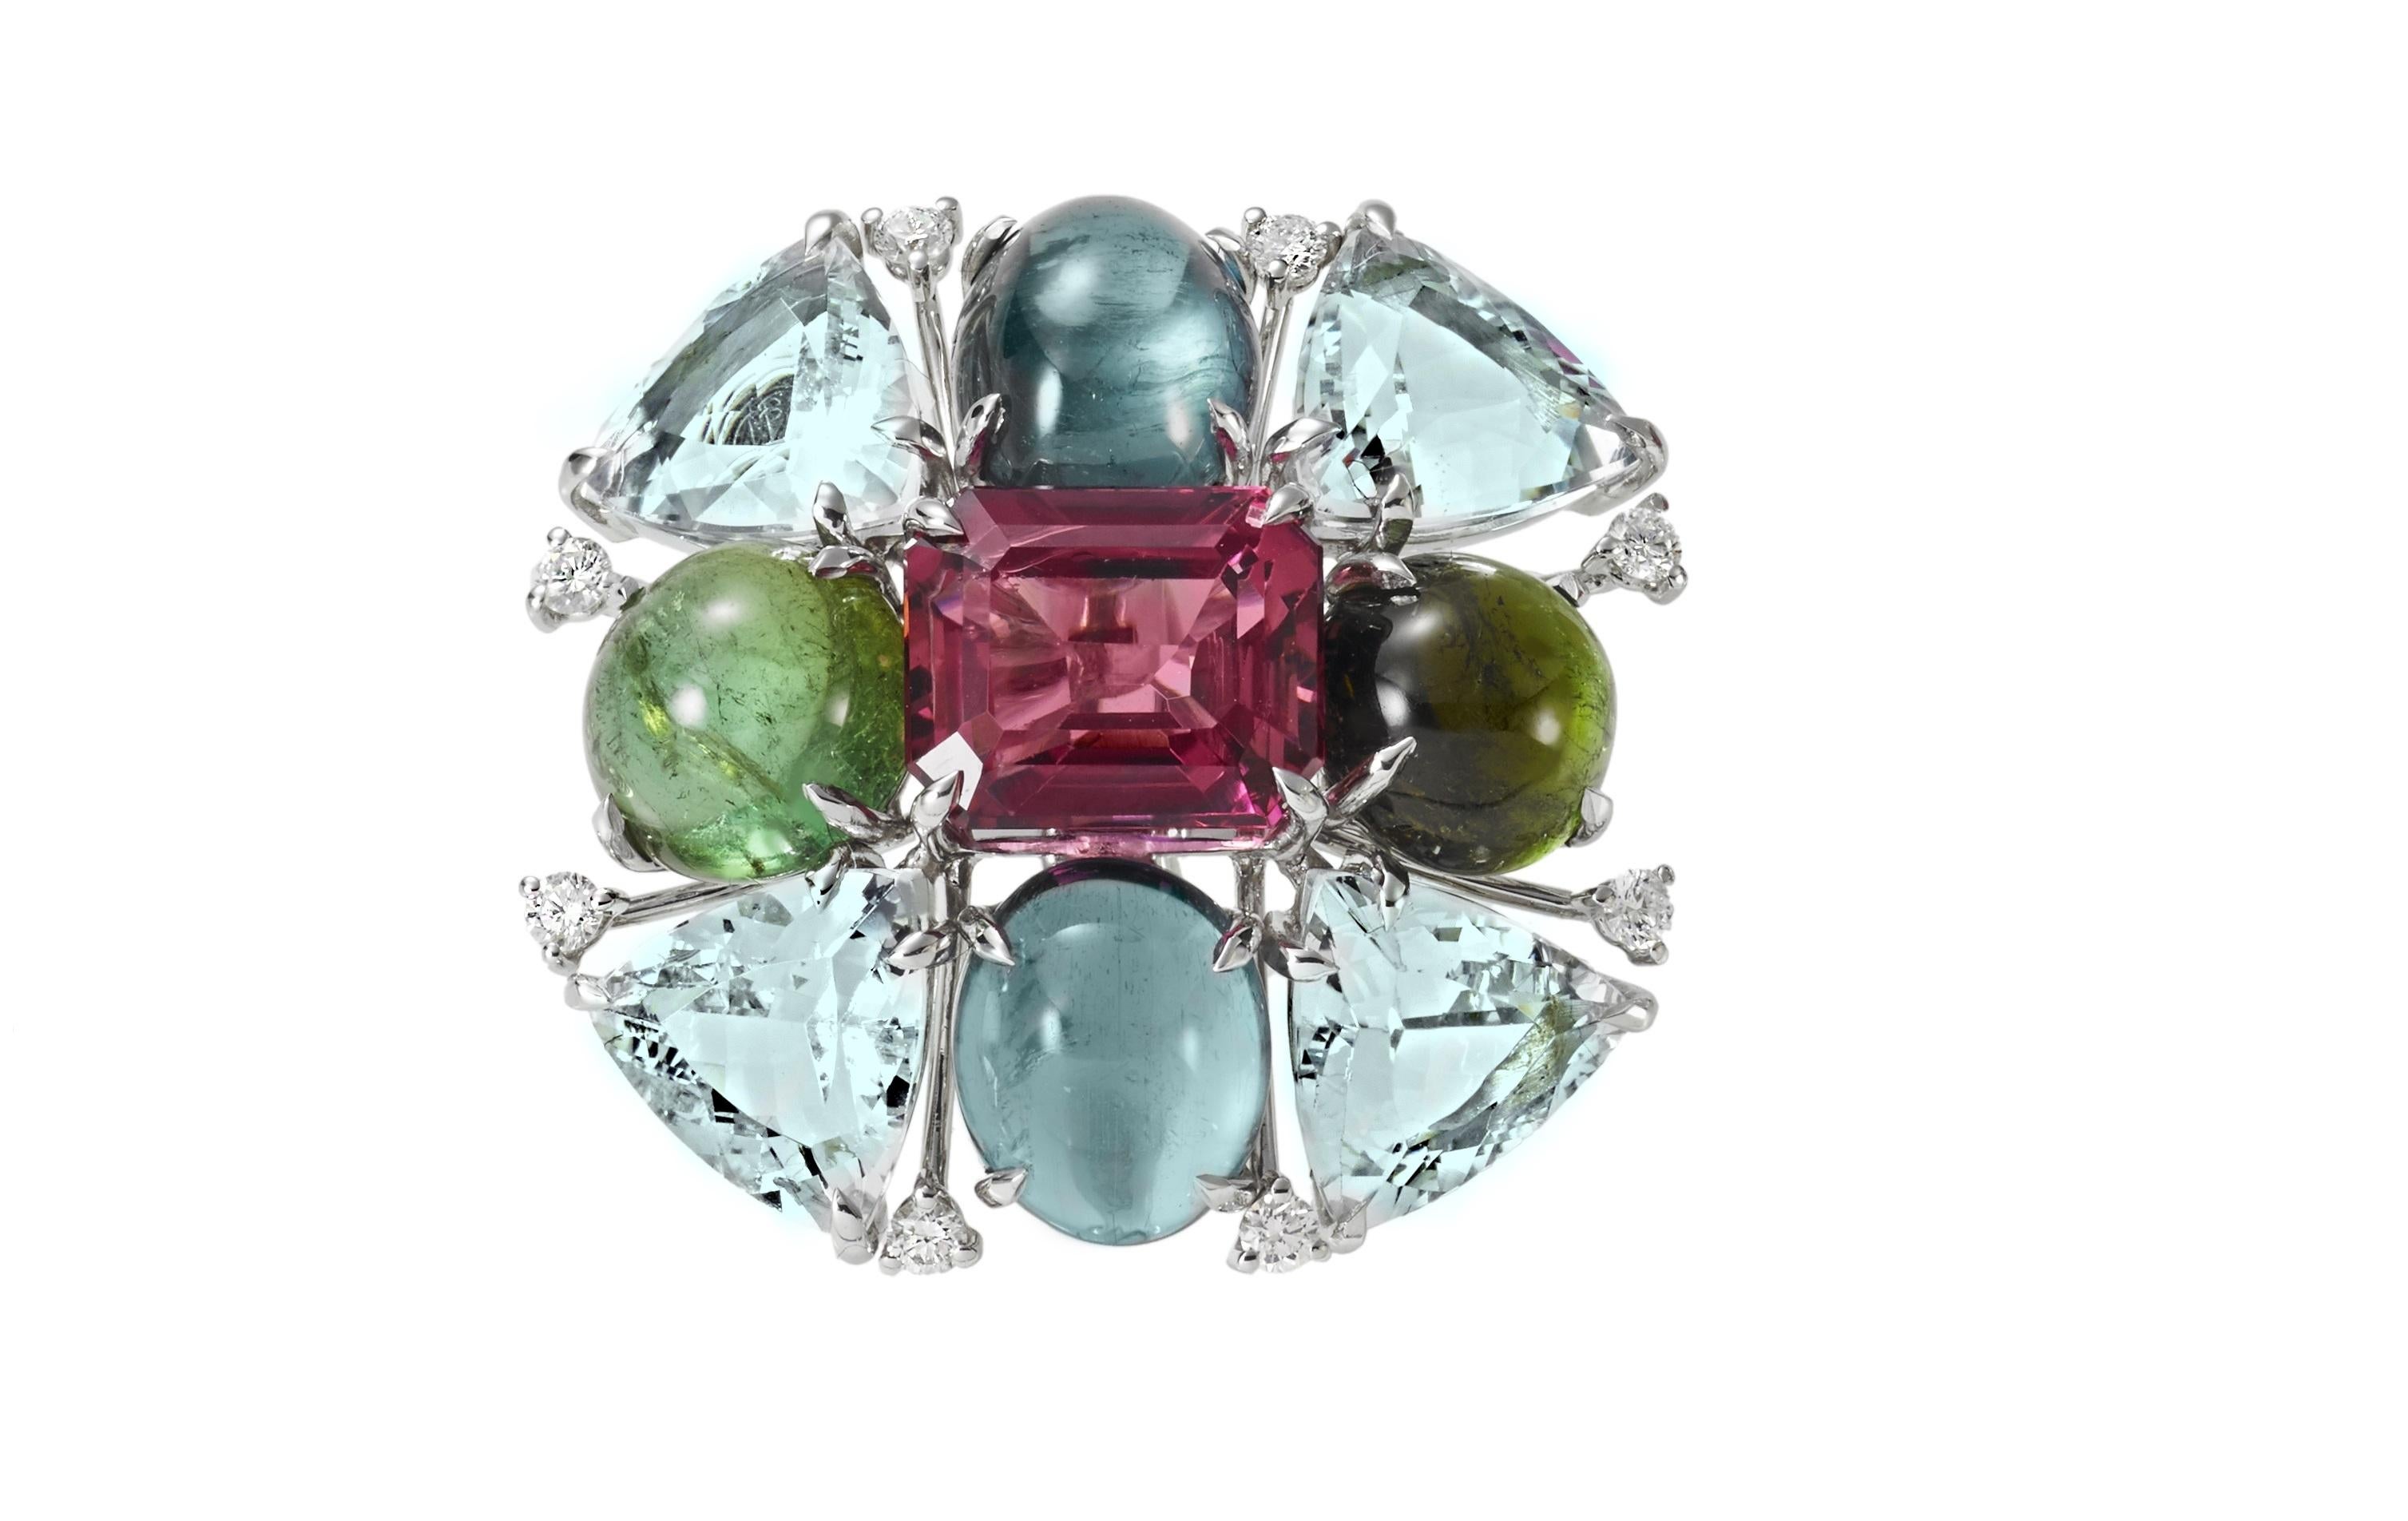 The unique ring is handmade in  18 carat white gold in Margherita Burgener  family workshop based in Italy.

The motif of colored stones is centering  a lovely round cabochon green tourmaline, surrounded by 4 oval faceted intense pink tourmalines,